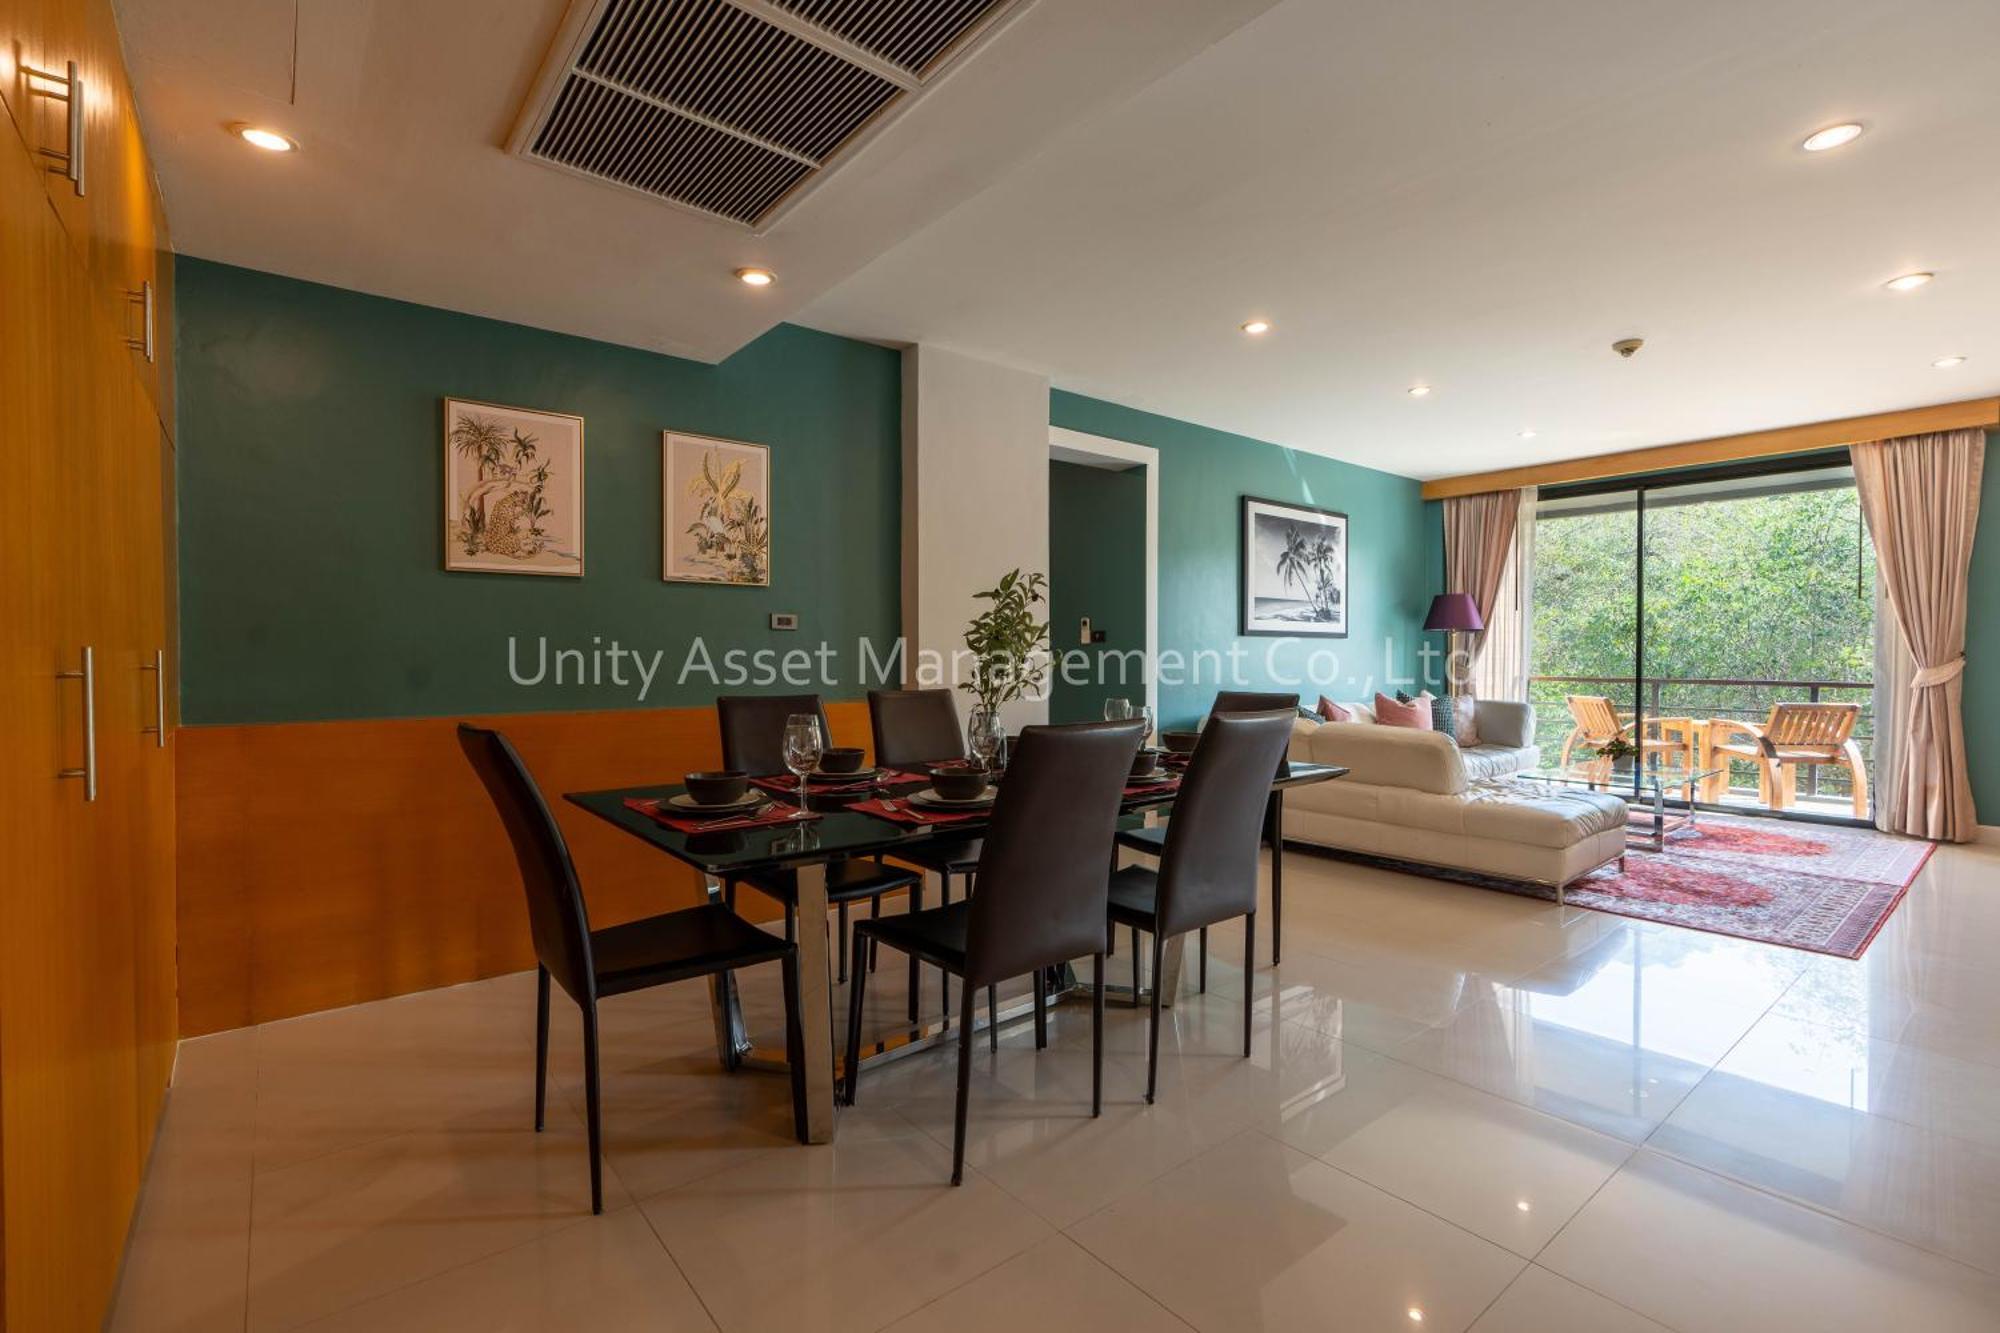 The Unity And The Bliss Patong Residence מראה חיצוני תמונה